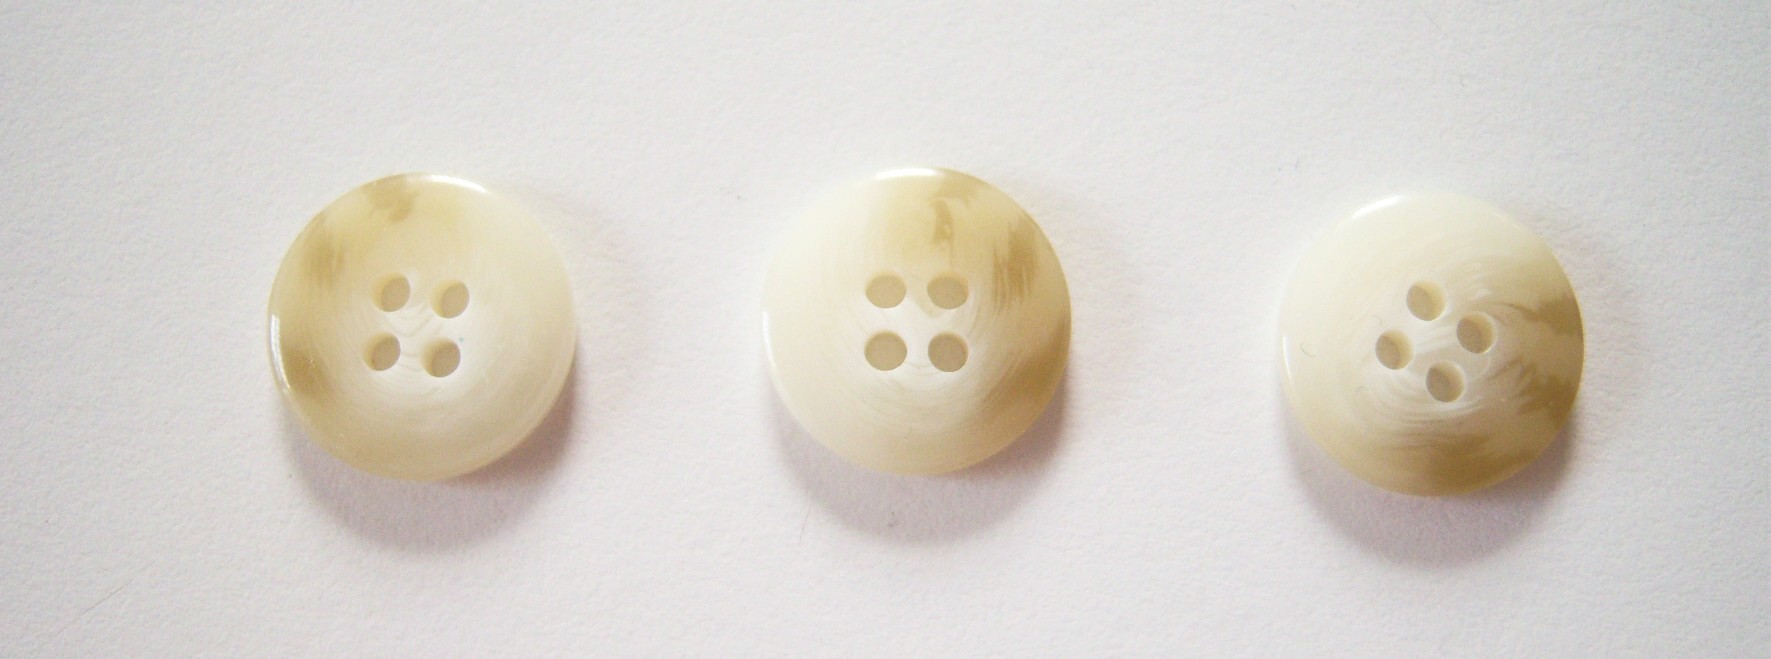 Shiny White/Beige 5/8" Poly 4 Hole Button